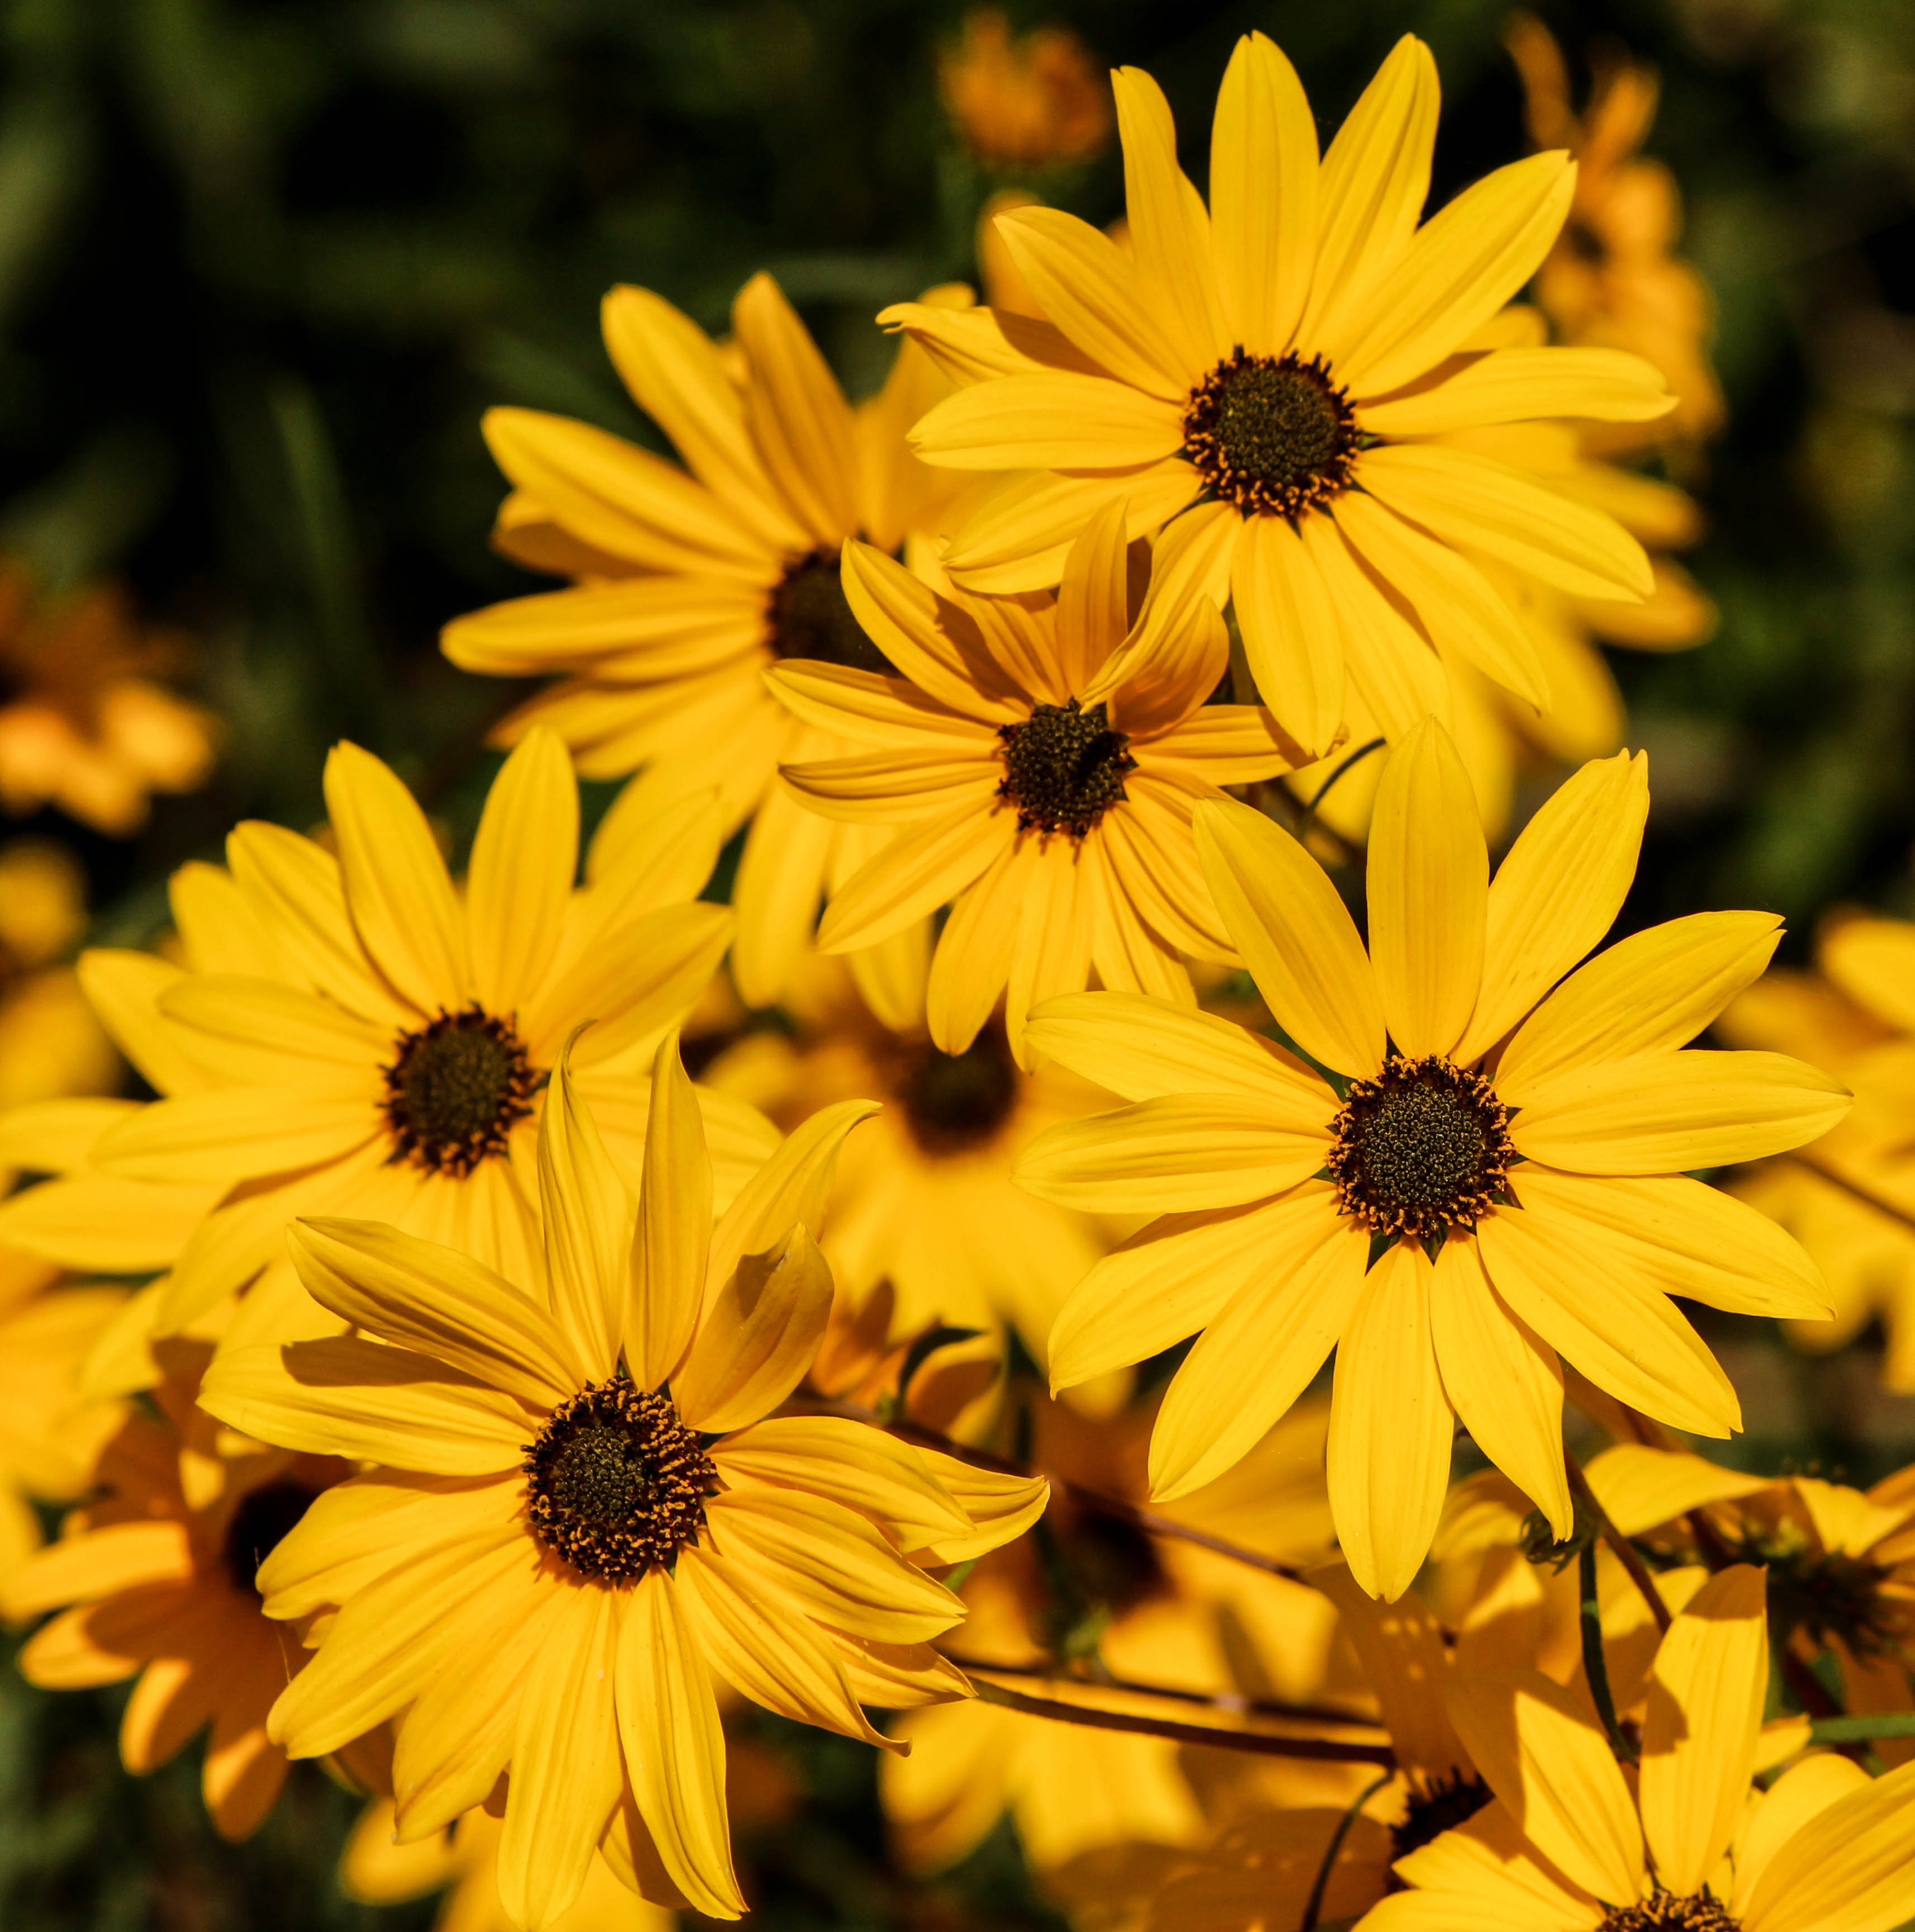 A flowerbed with yellow flowers